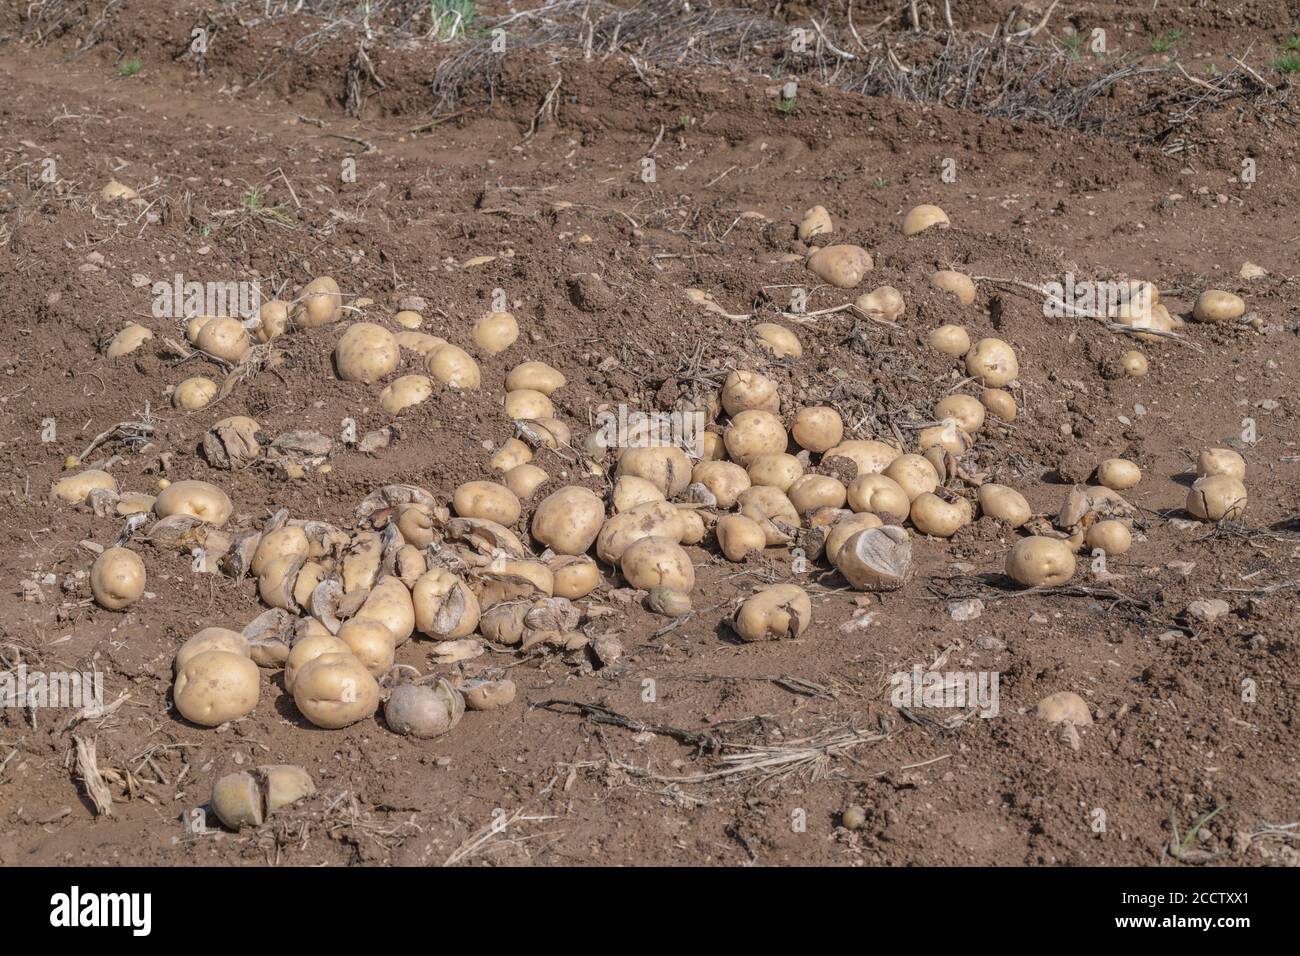 Potatoes spilled on ground. These may be a pile of rejected that failed inspection as they passed through a Grimme potato harvester used for cropping. Stock Photo